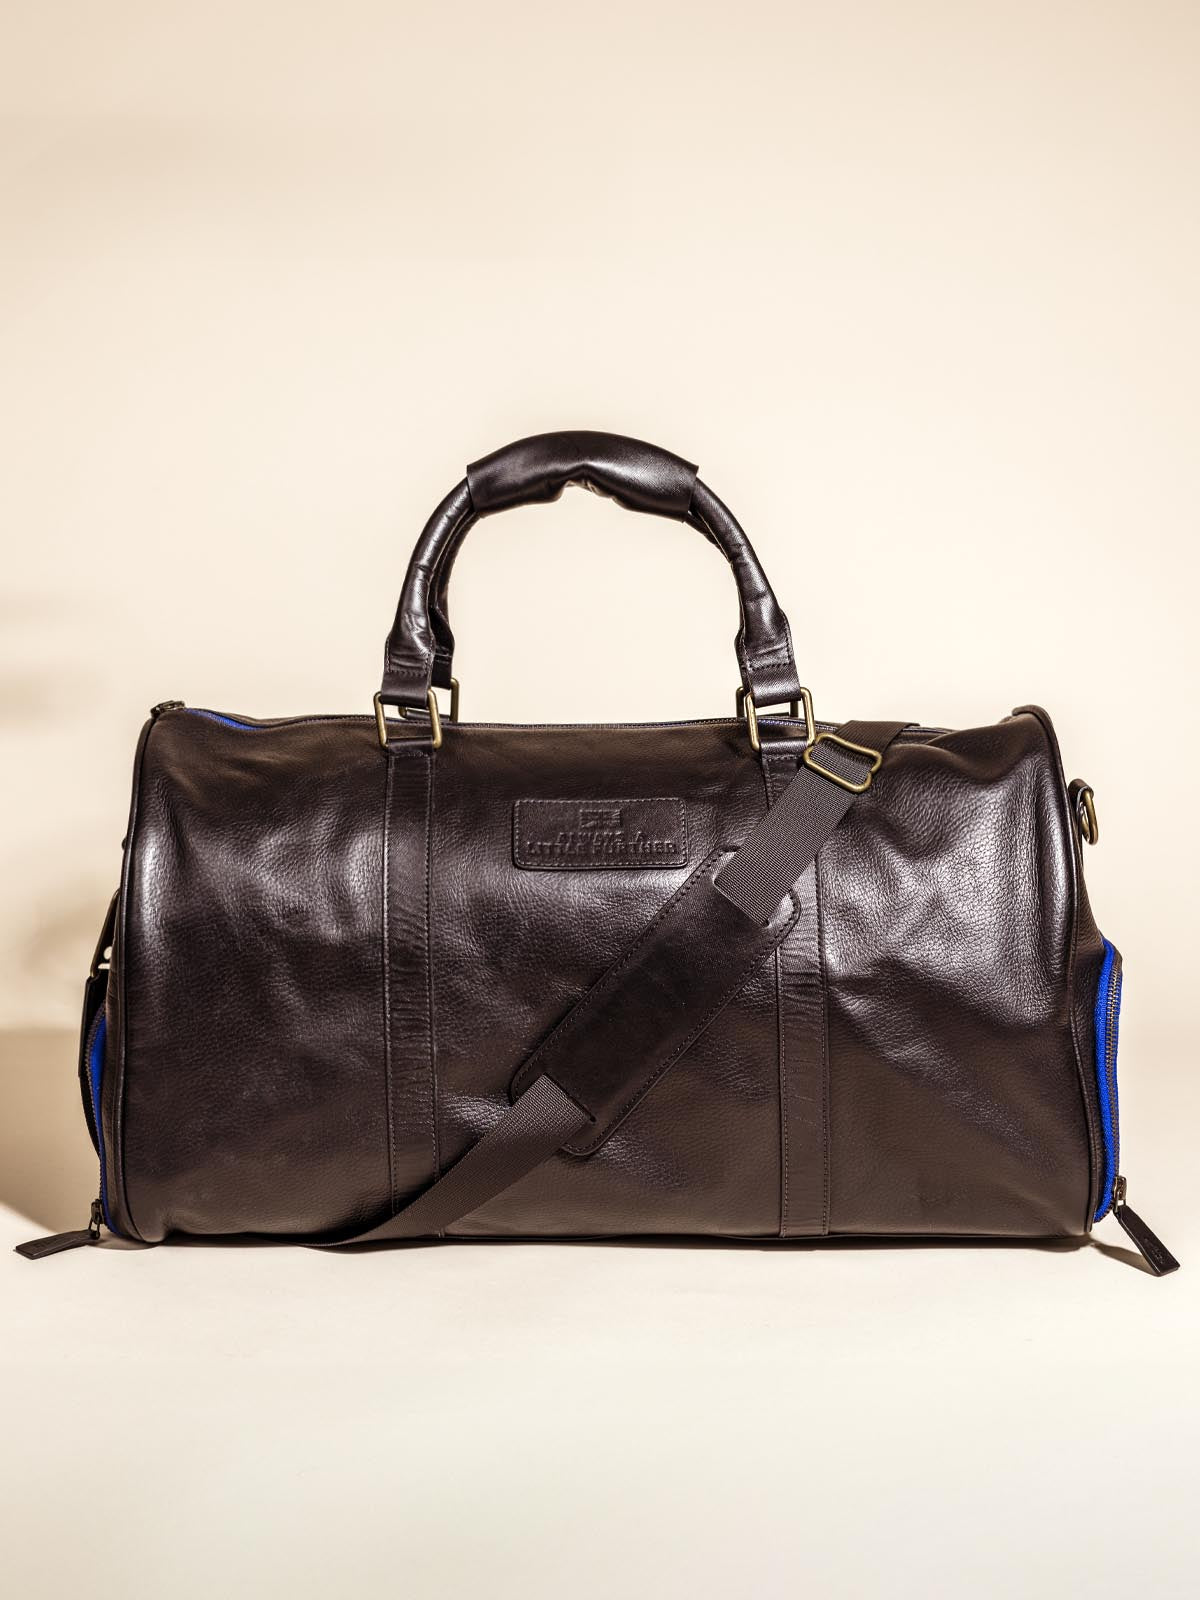 Black Leather Duffle Bag on off white backdrop featuring shoulder straps, hand straps, and blue accent zippers